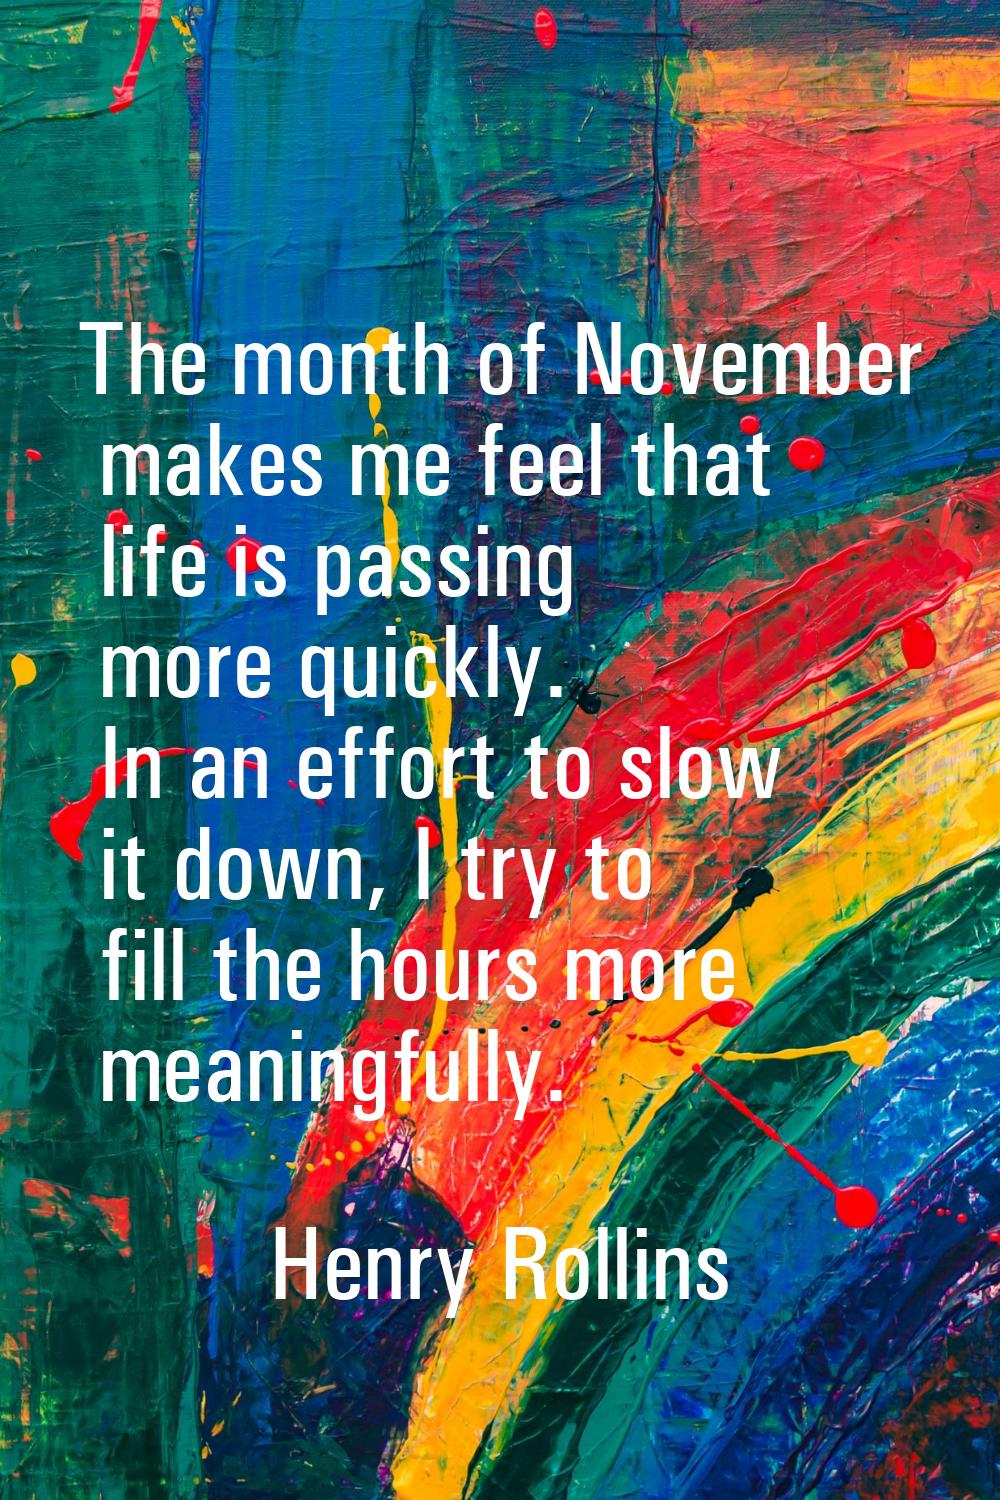 The month of November makes me feel that life is passing more quickly. In an effort to slow it down